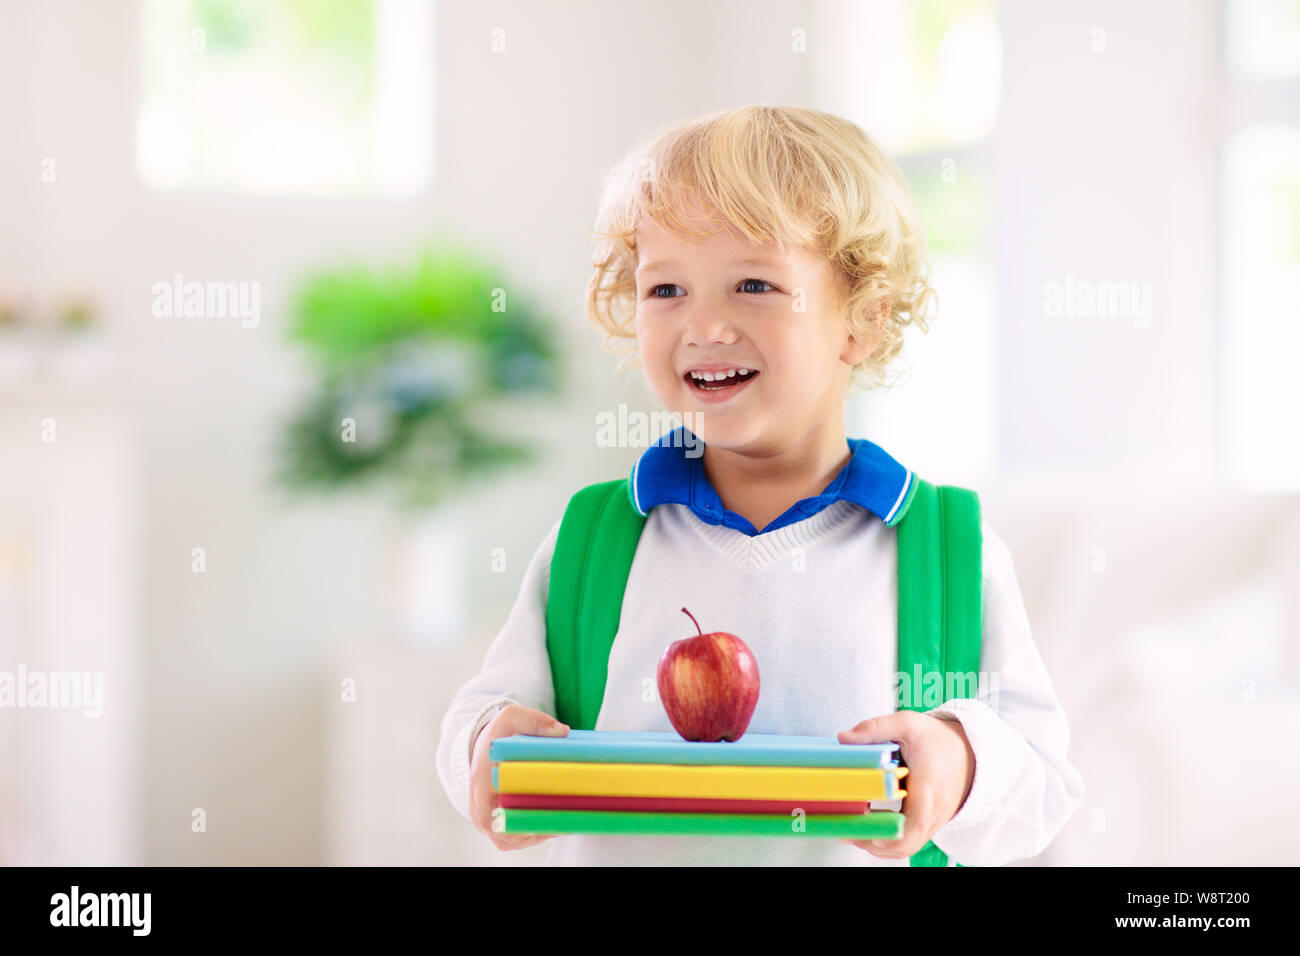 Child going back to school. Kid getting ready for first school day after vacation. Little boy on his way to kindergarten or preschool. Student packing Stock Photo